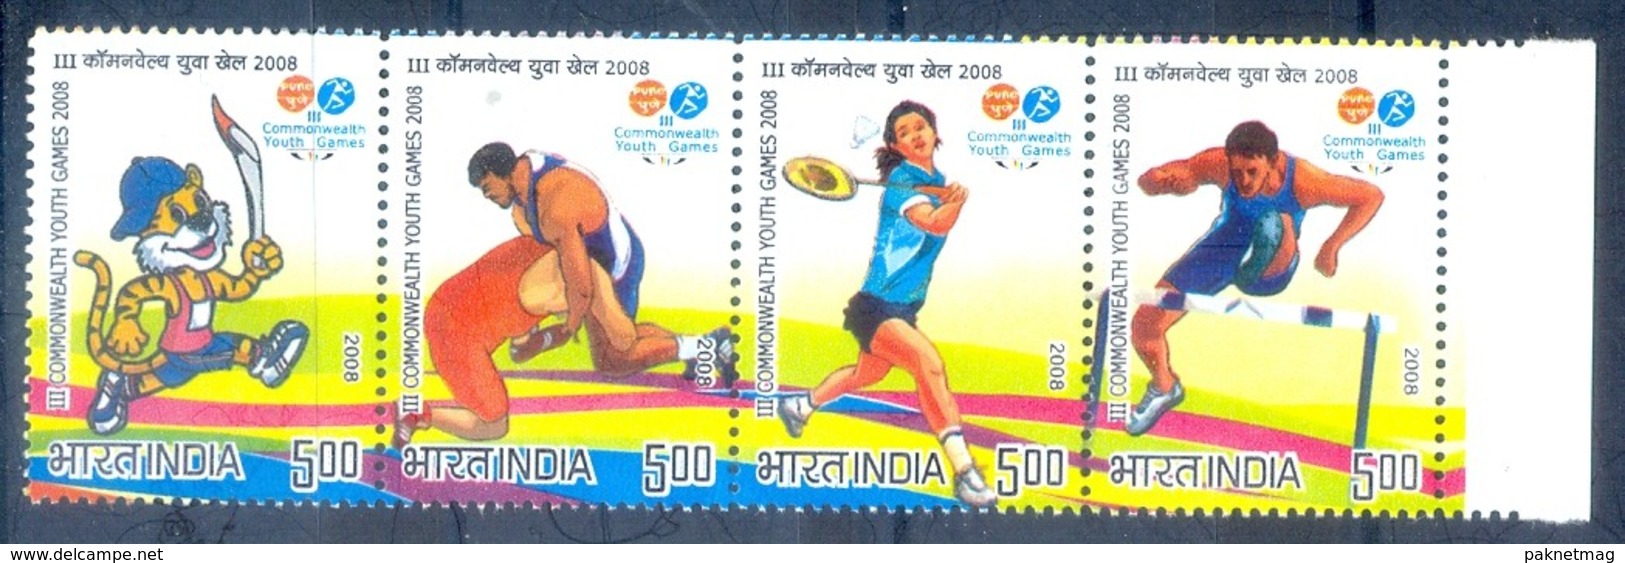 P71- India 2008, 3rd Common Wealth Youth Games, Wrestling, Badminton, Sports. - Unused Stamps